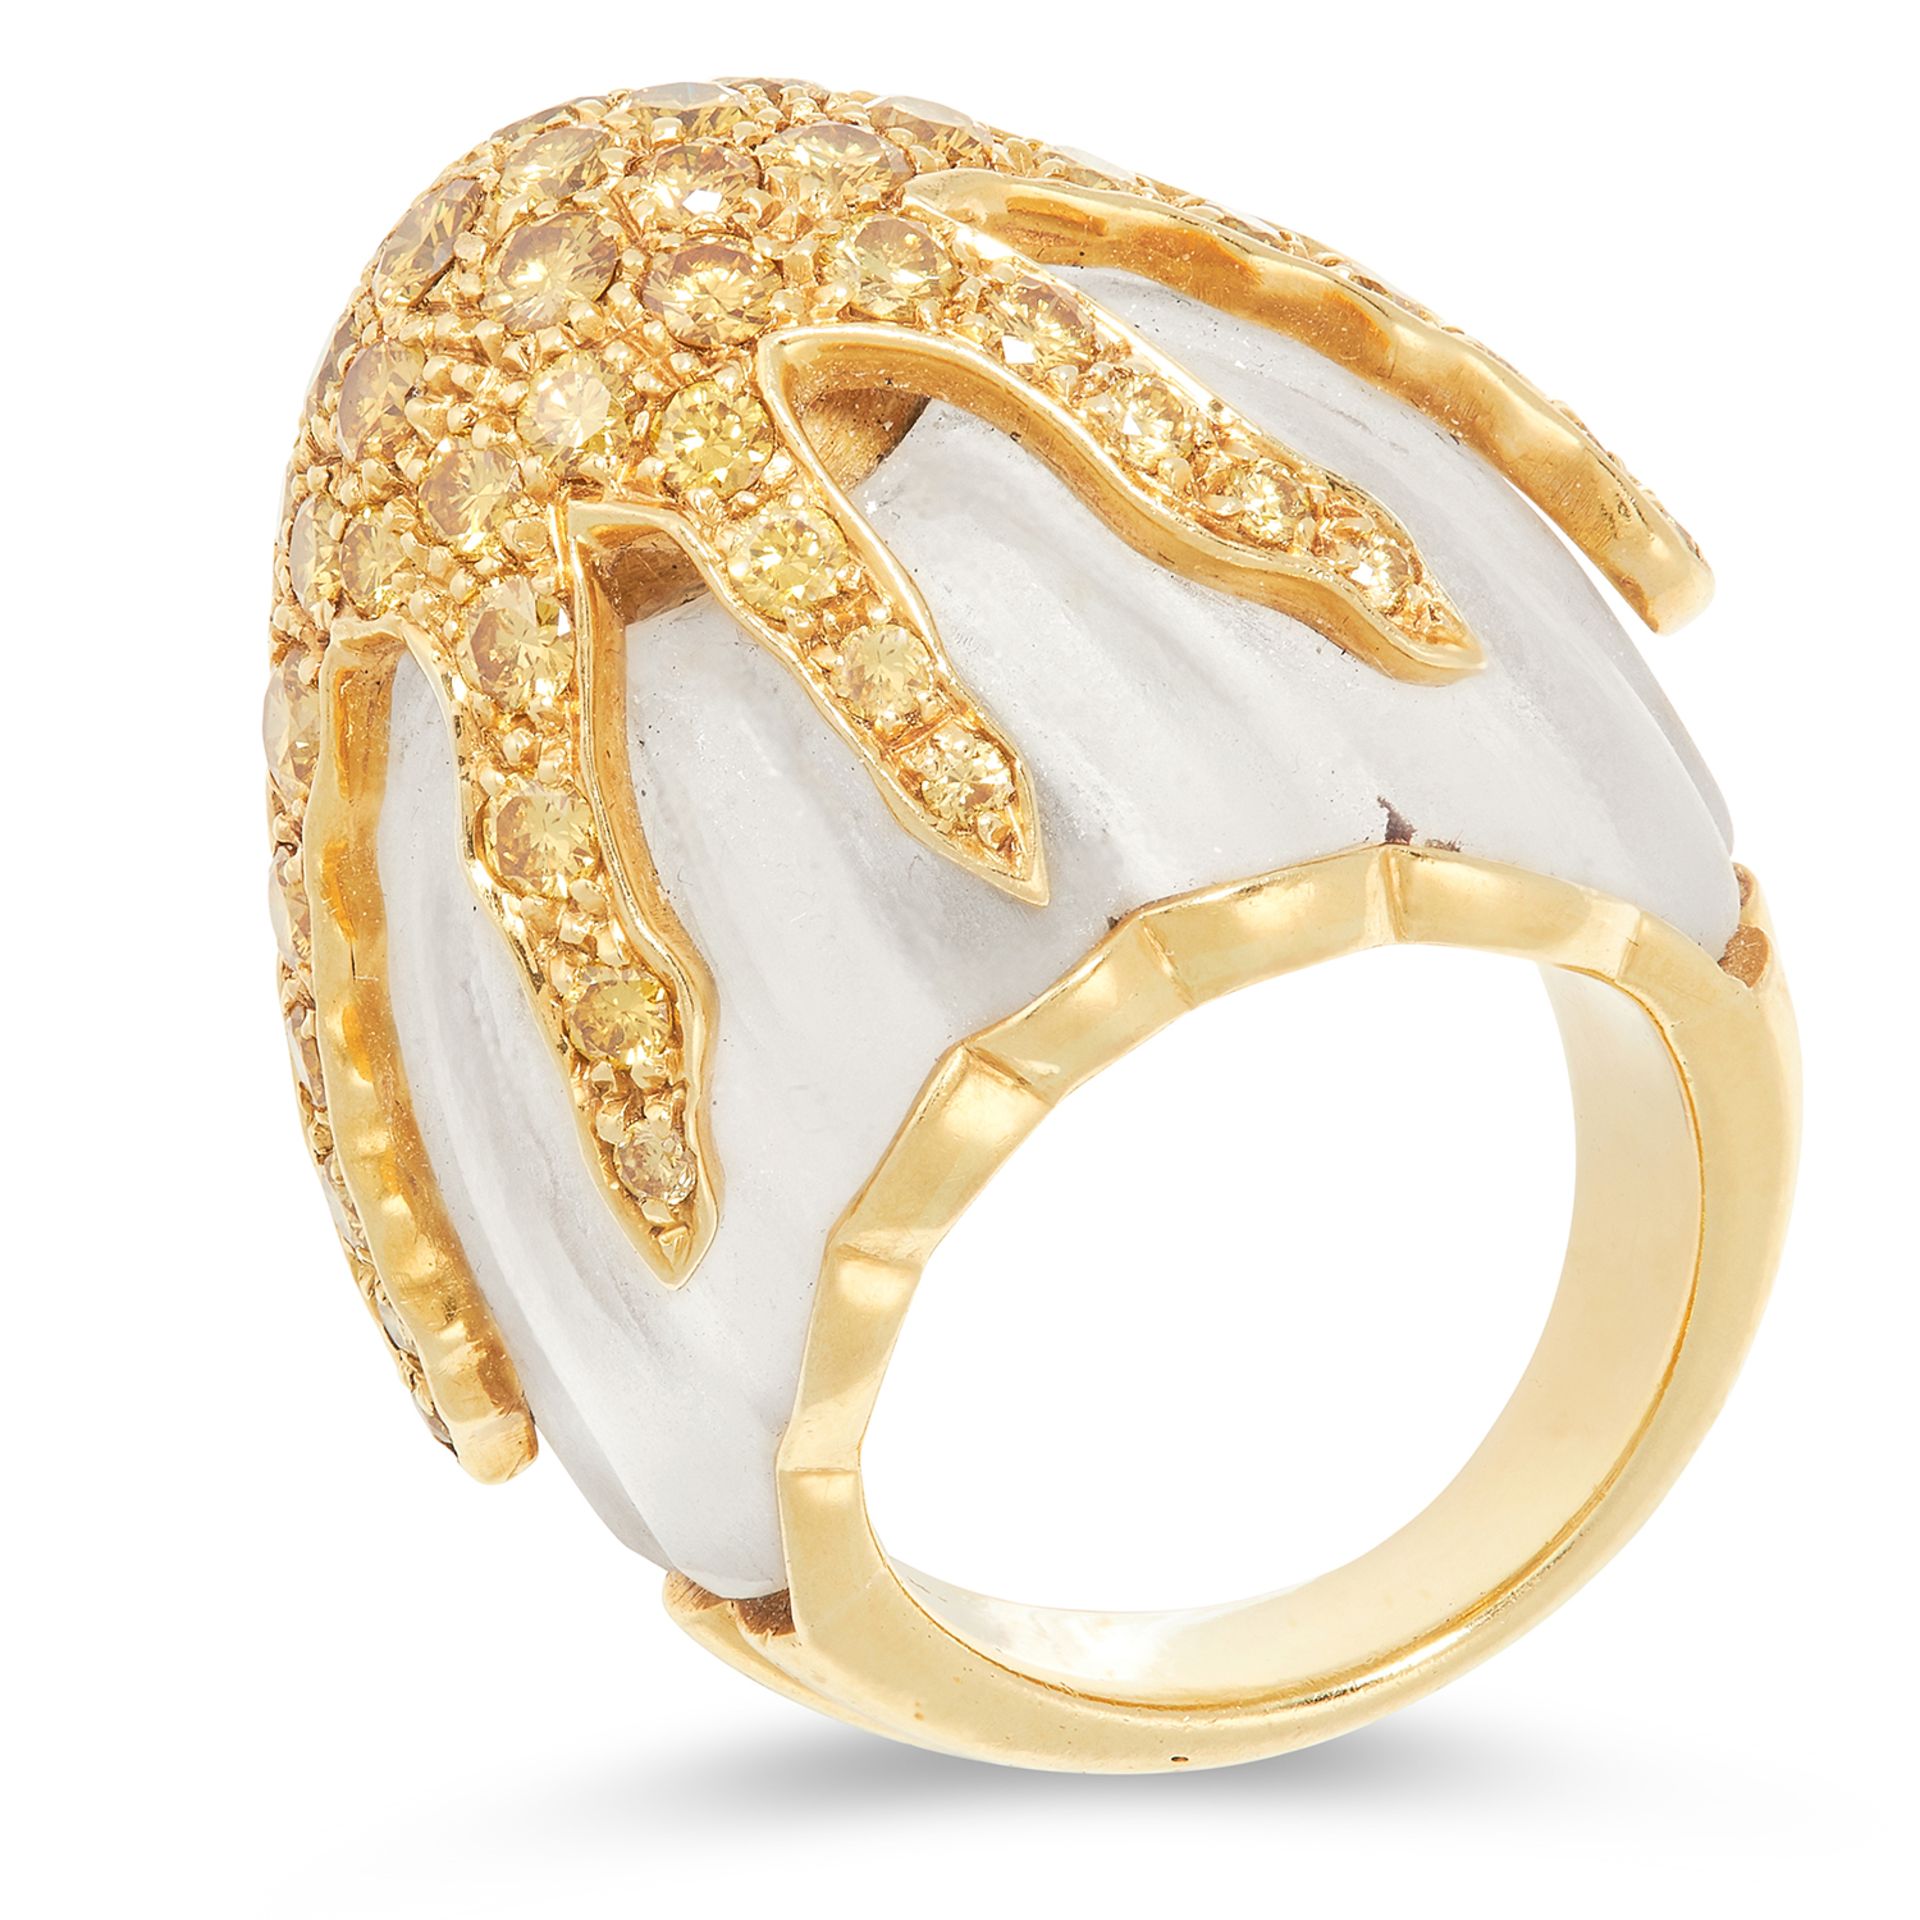 A YELLOW DIAMOND AND ROCK CRYSTAL RING designed as a lobed carved piece of rock crystal with frosted - Bild 2 aus 2